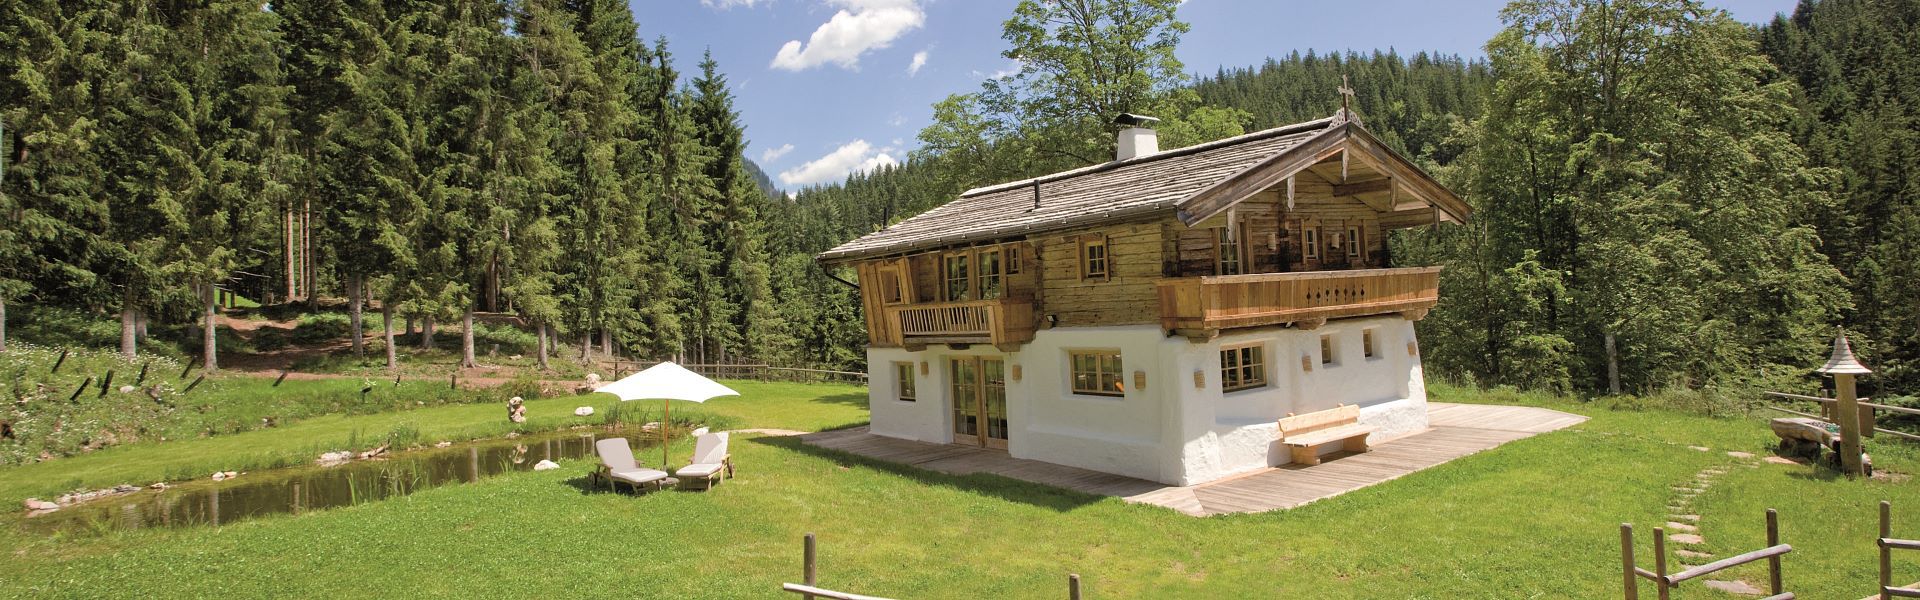 <strong>Hüttlingmoos</strong><br><br>This peaceful luxury chalet at the foot of the Wilder Kaiser makes every event an unforgettable one while also boasting an ultra-modern technical infrastructure...